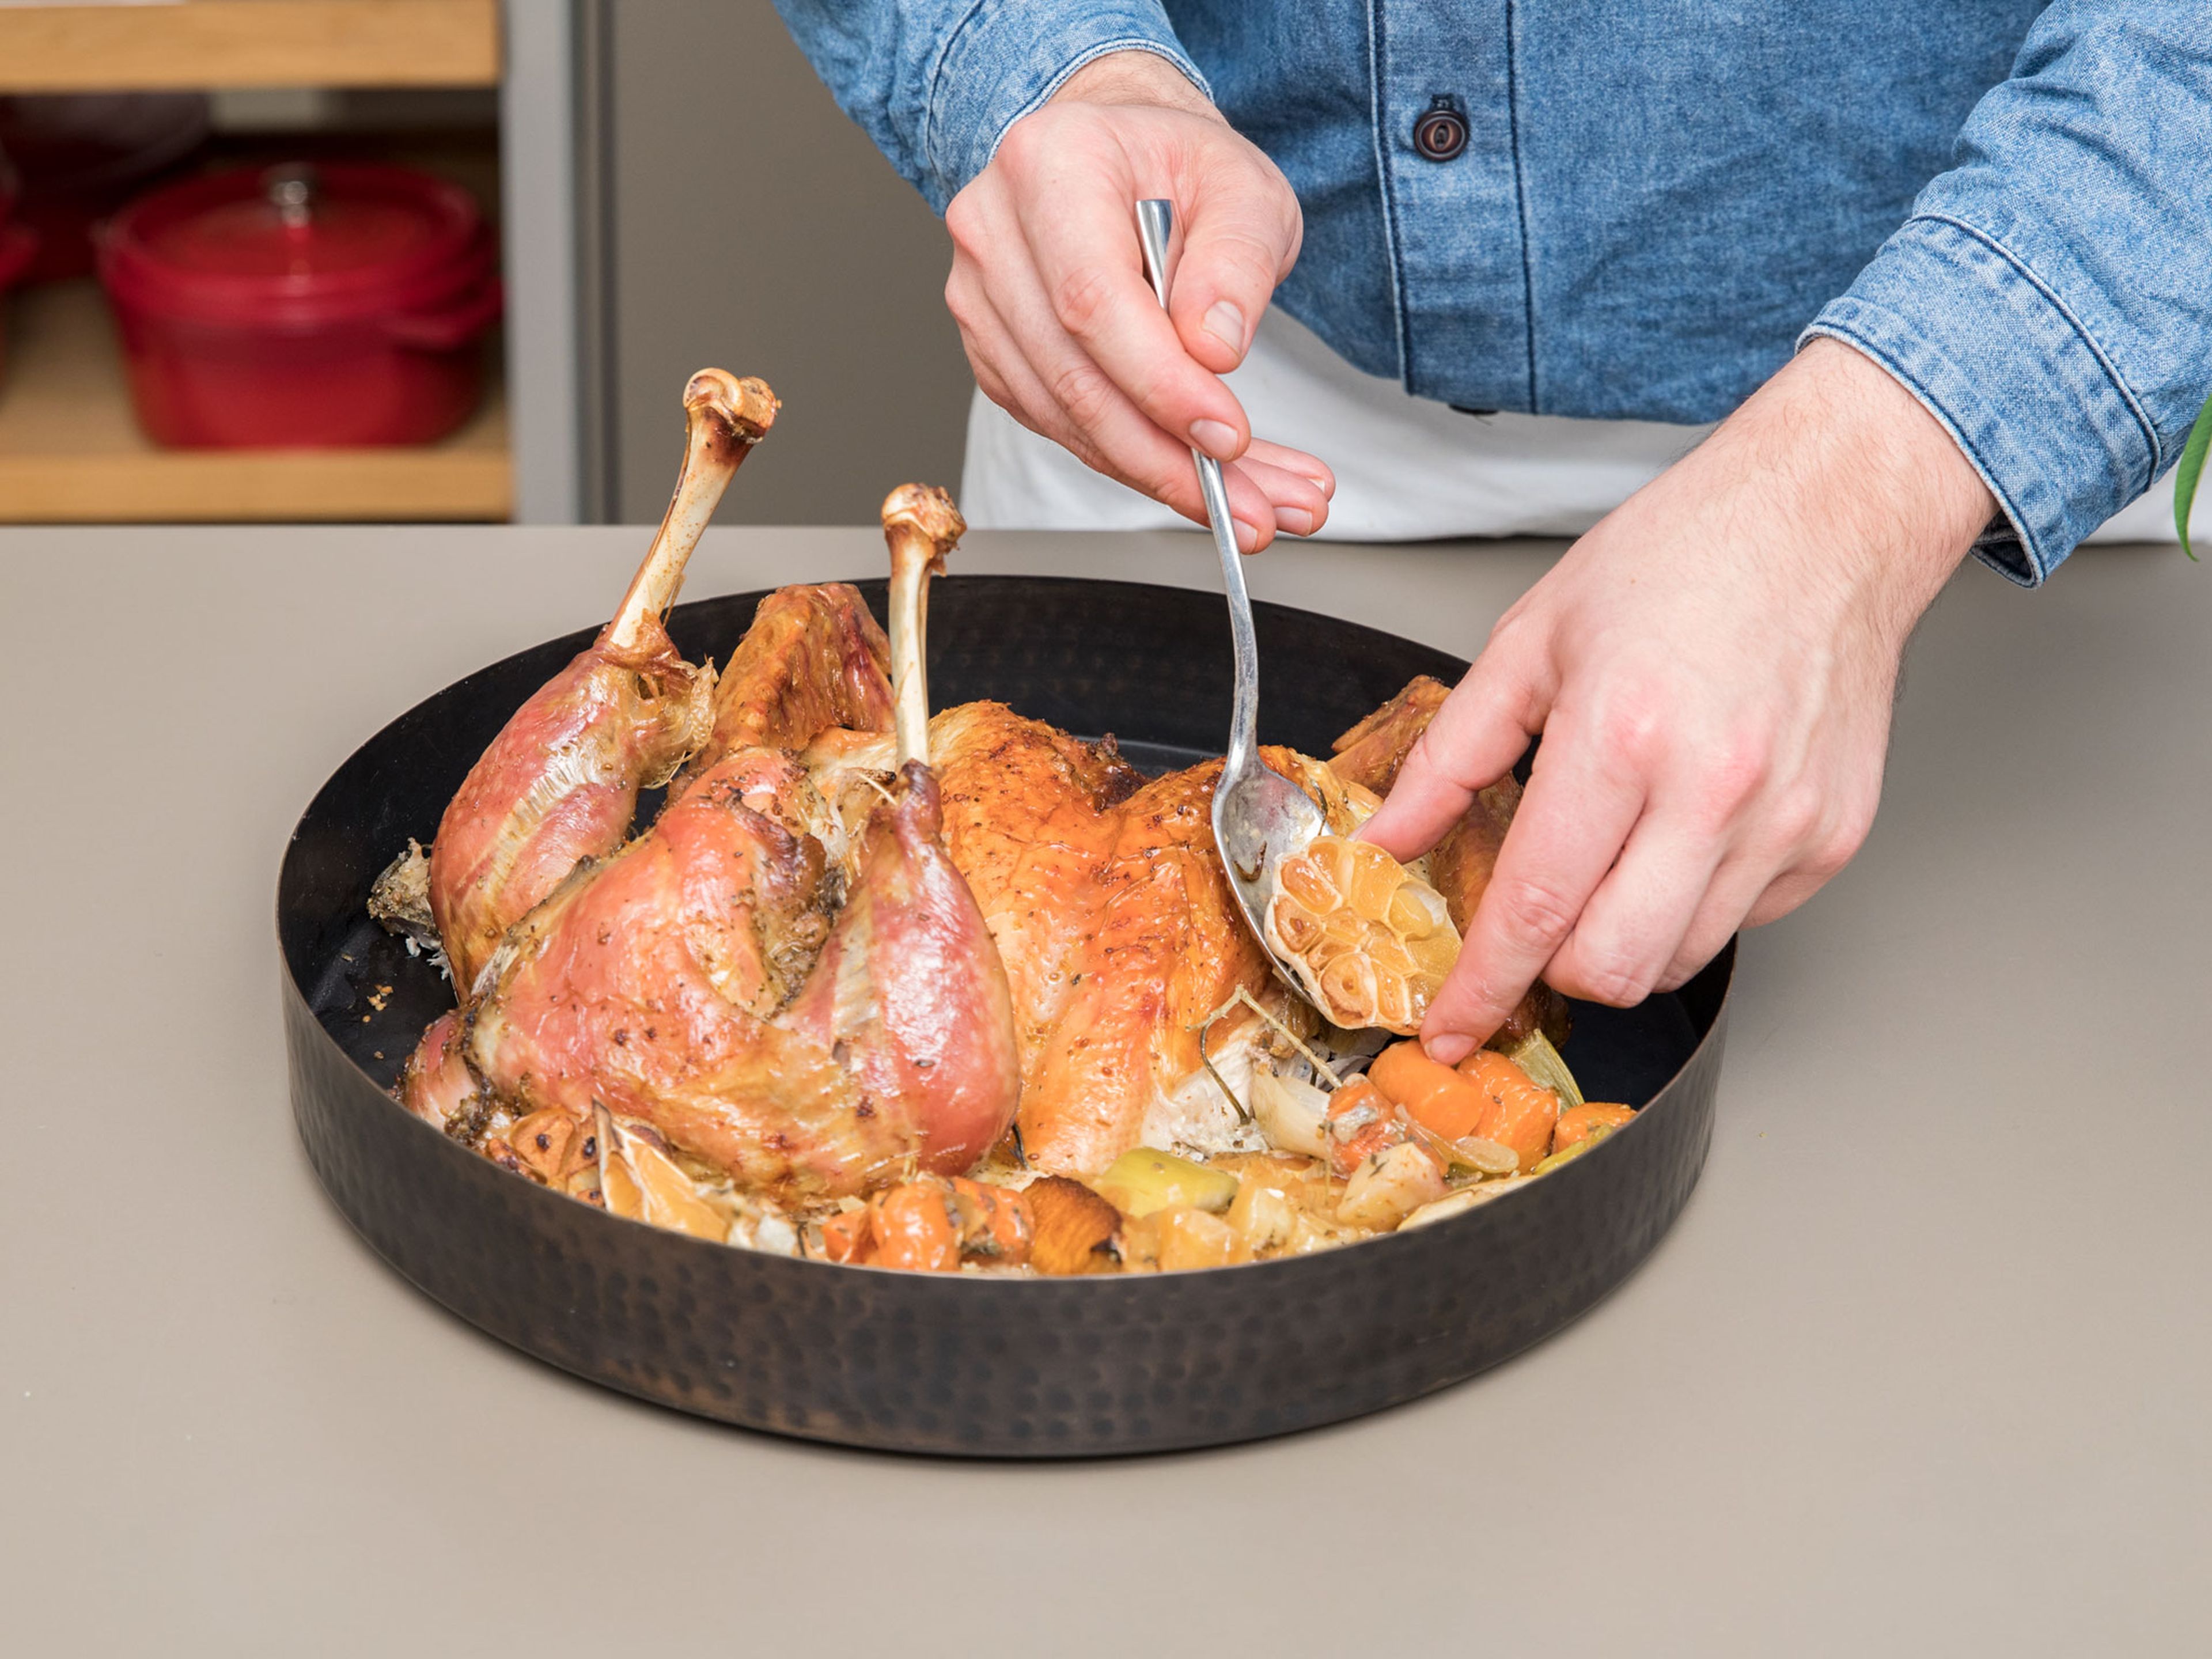 Remove aluminum foil and serve turkey with roasted vegetables. Enjoy!